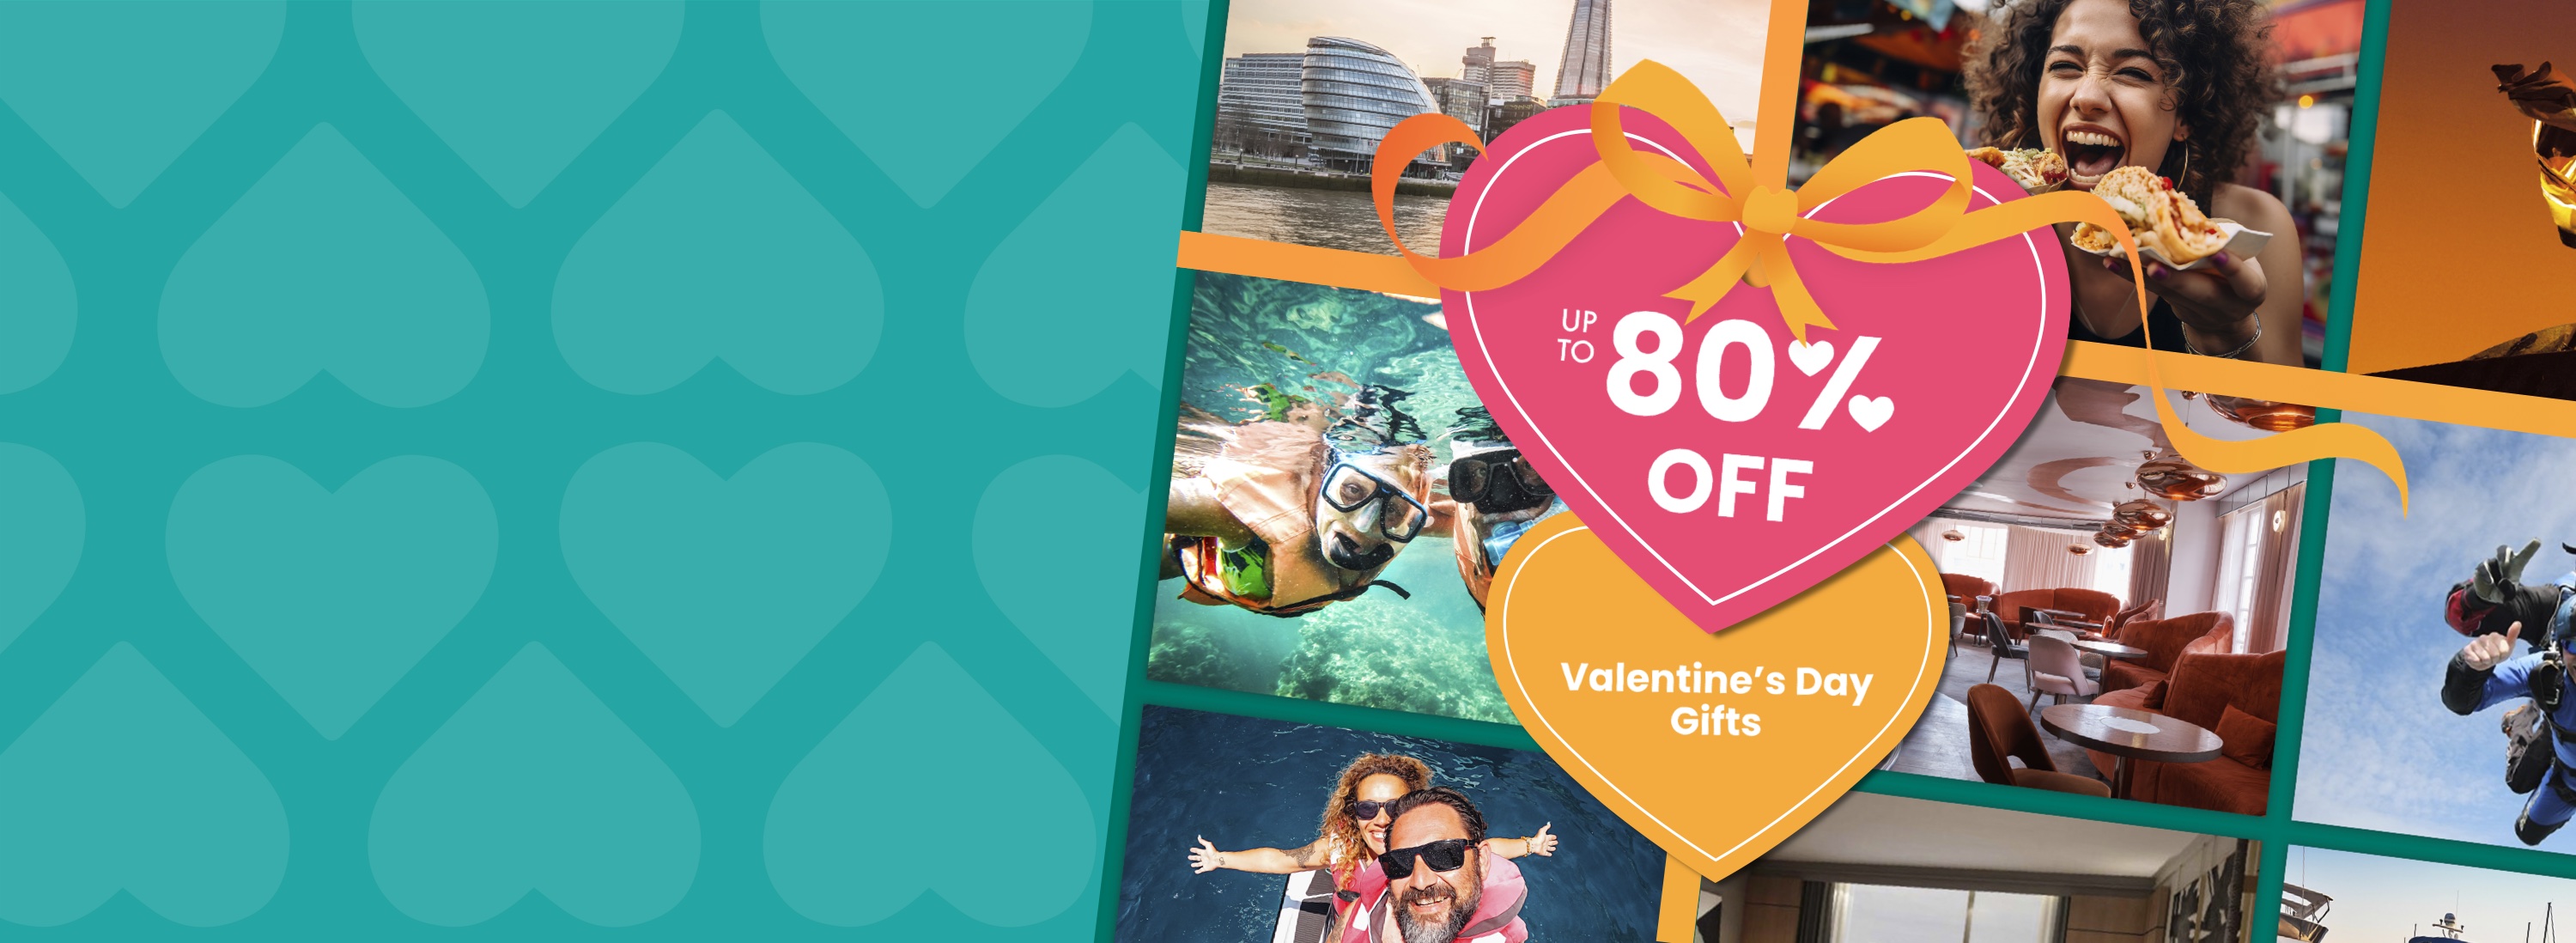 Valentine's Day Gifts - Up to 80% off